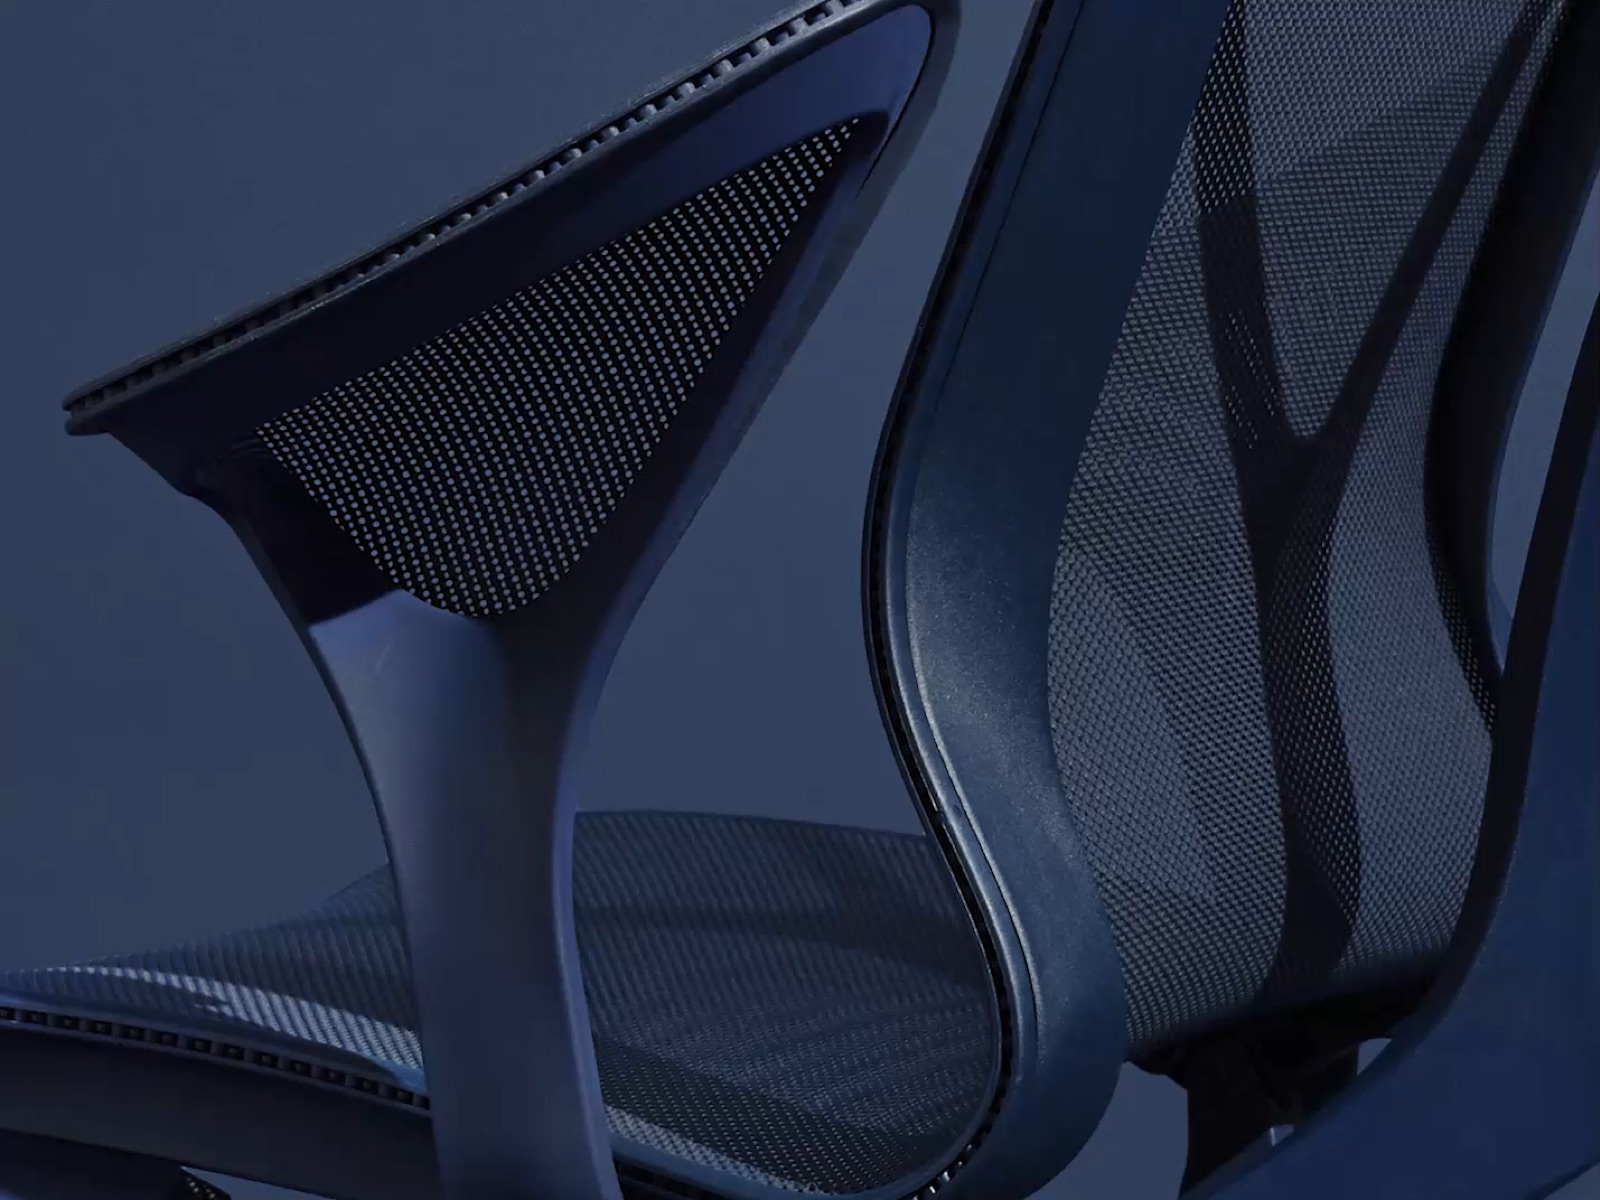 A close-up from behind of the leaf arm on a Nightfall dark blue Cosm ergonomic chair.